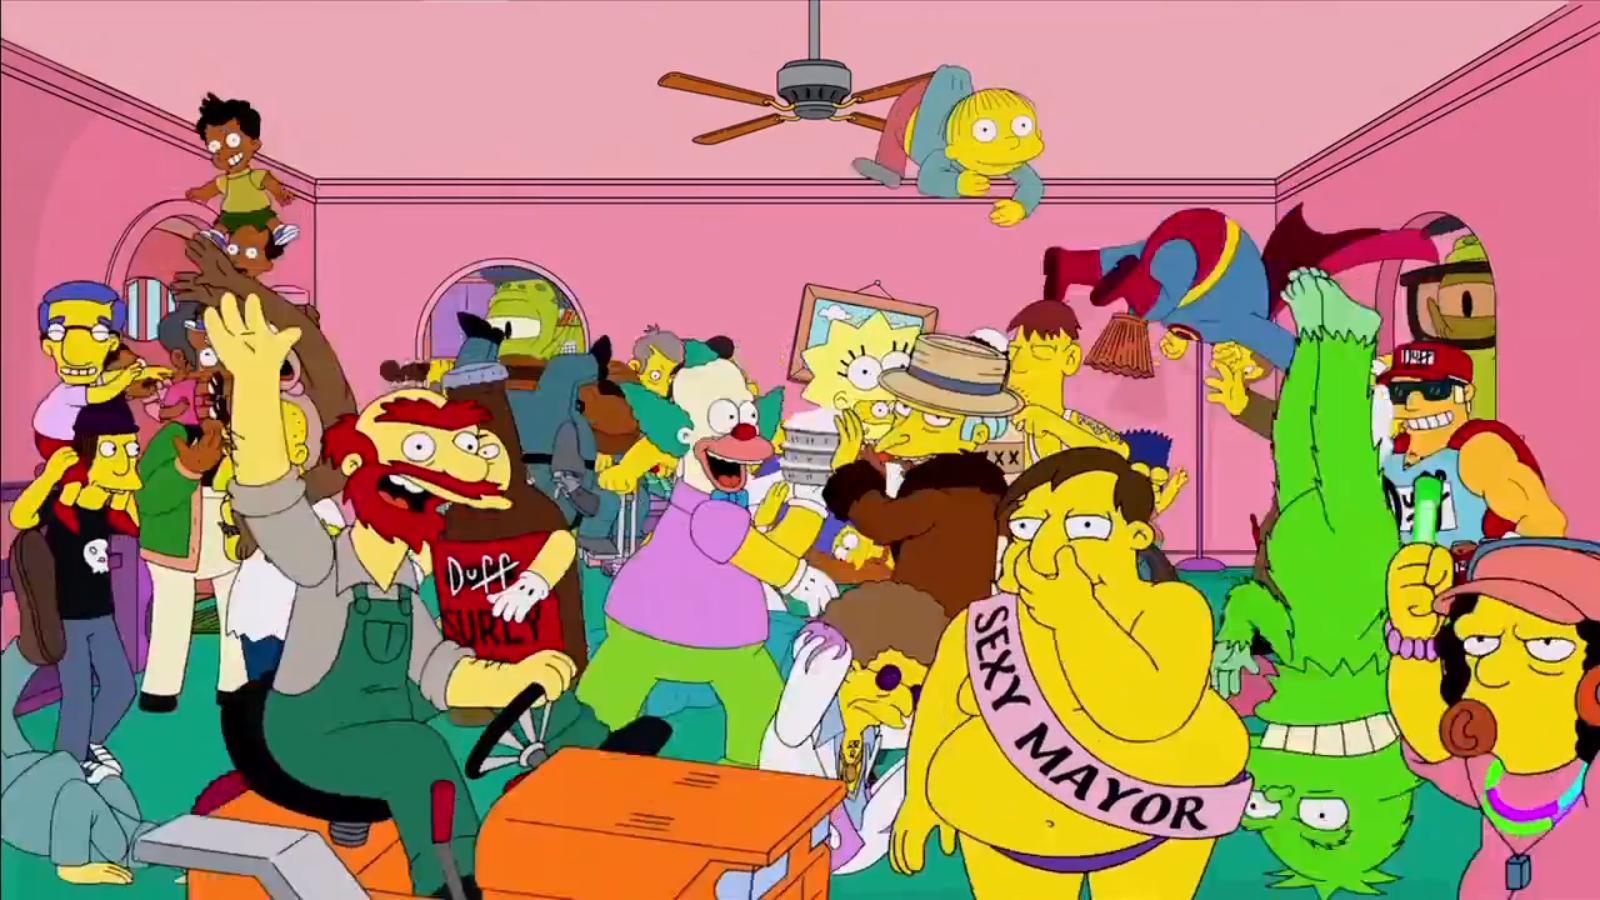 Old simpsons orgy